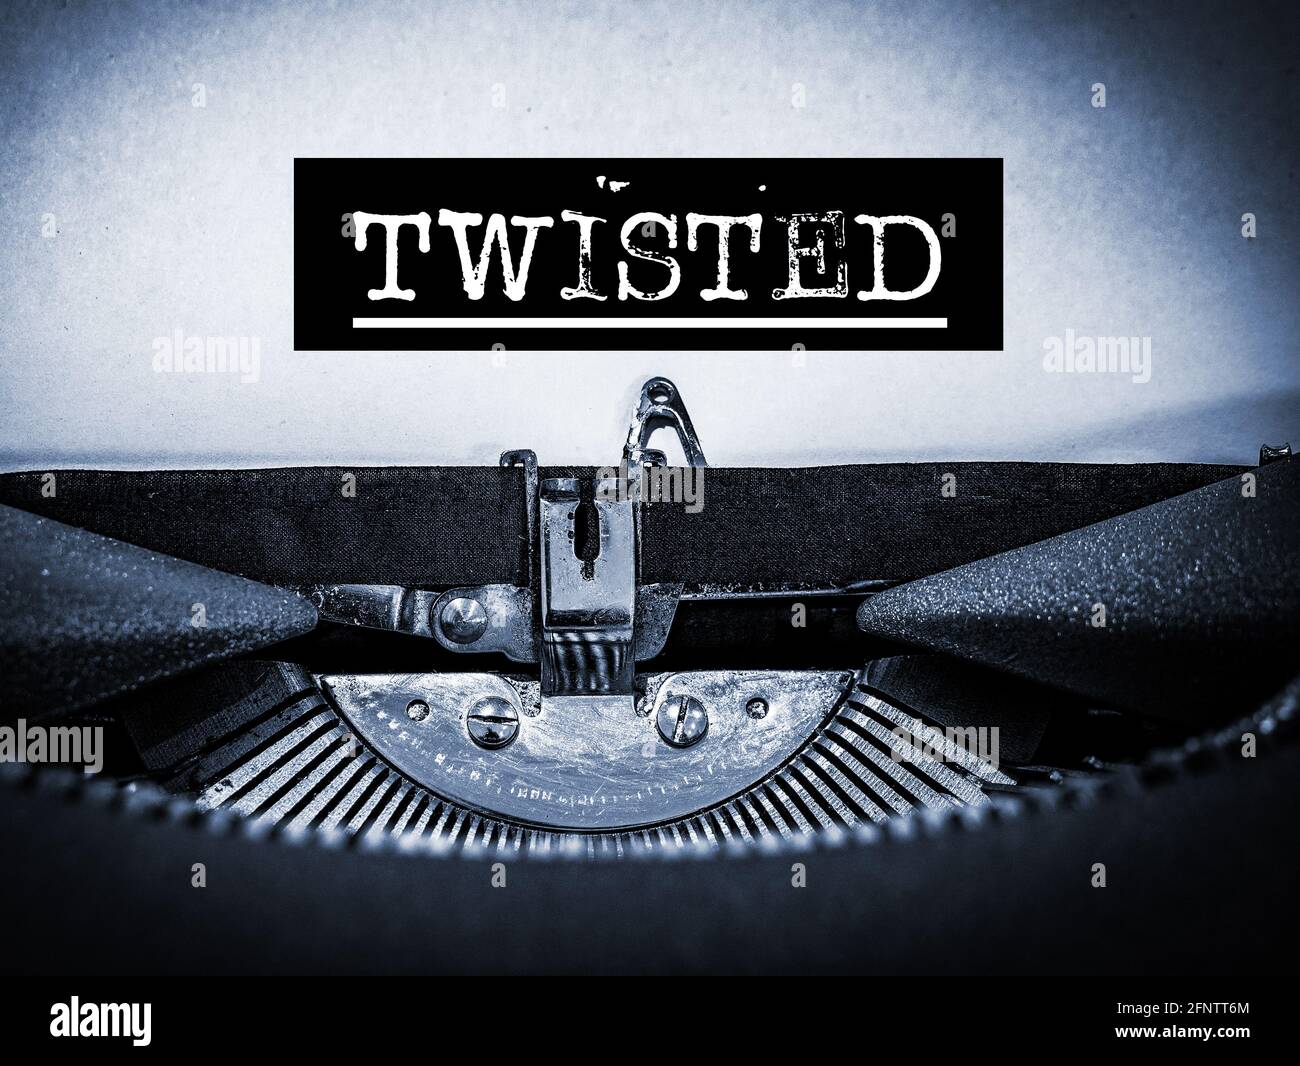 Twisted displayed on a vintage typewriter with underline script and black border in a blue tone Stock Photo